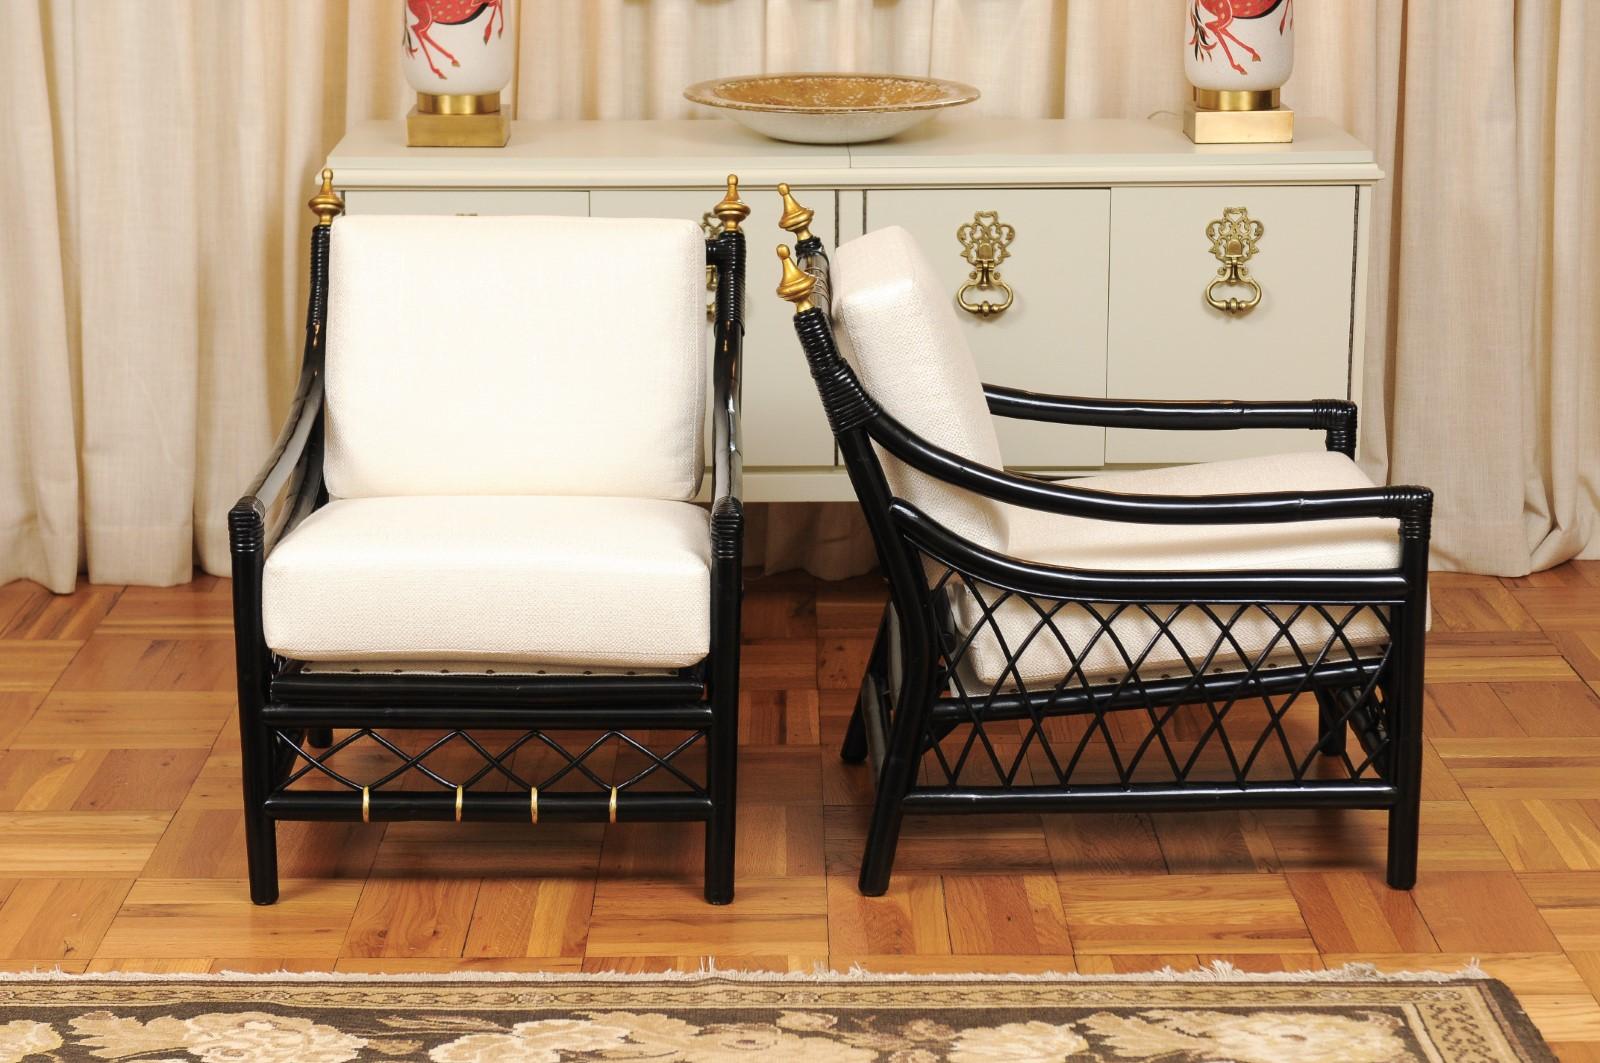 Mid-20th Century Elegant Restored Pair of Throne Loungers by Willow and Reed, circa 1955 For Sale